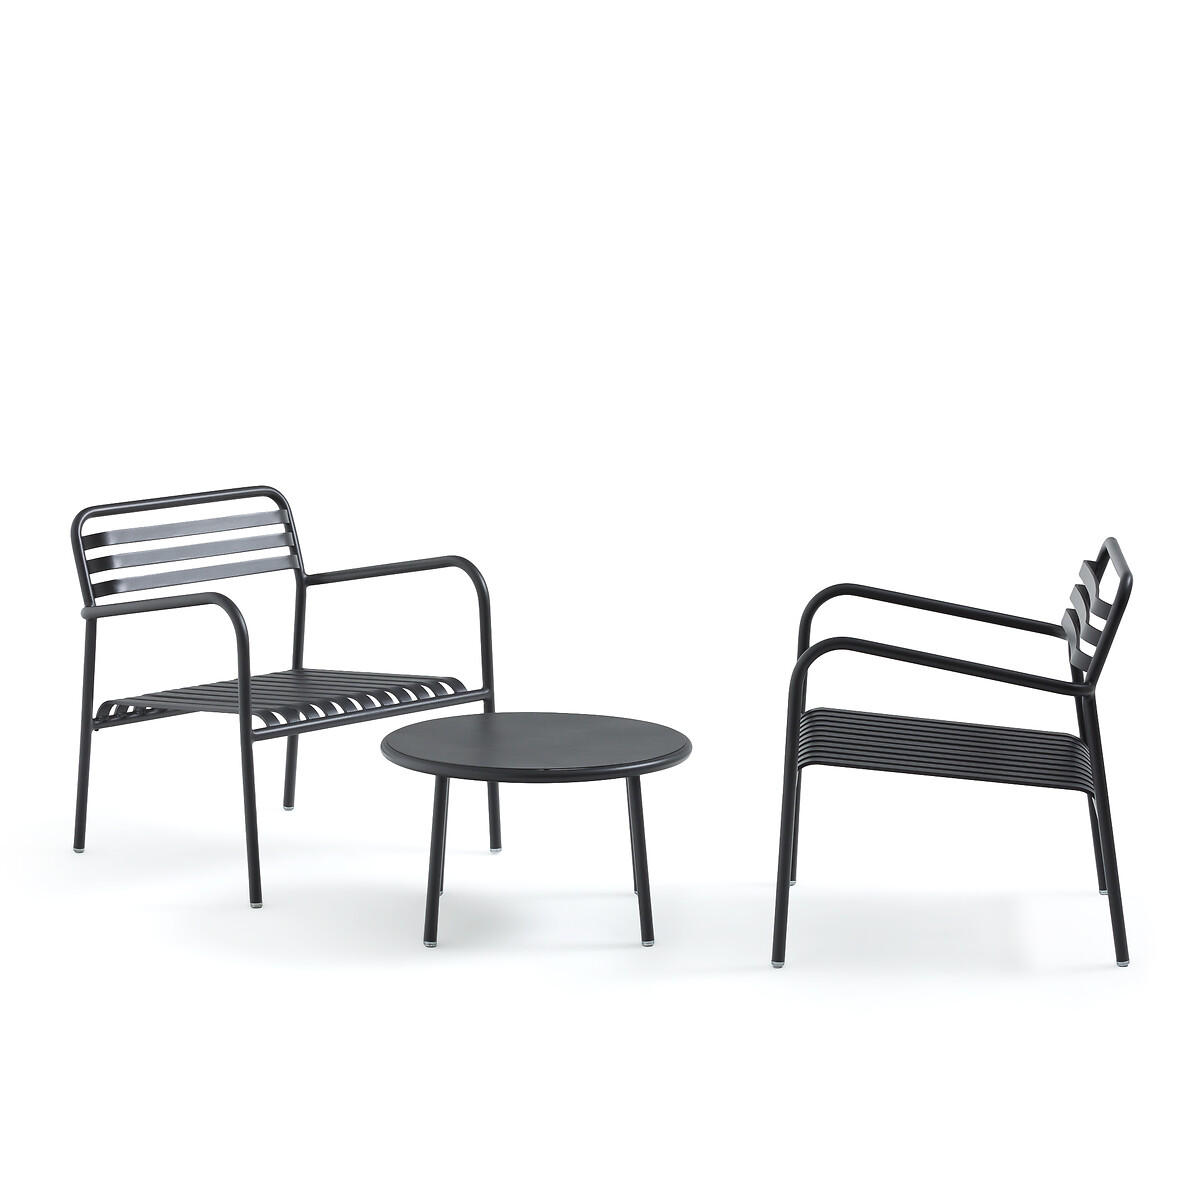 Manni Aluminium Garden Table and Chairs Set